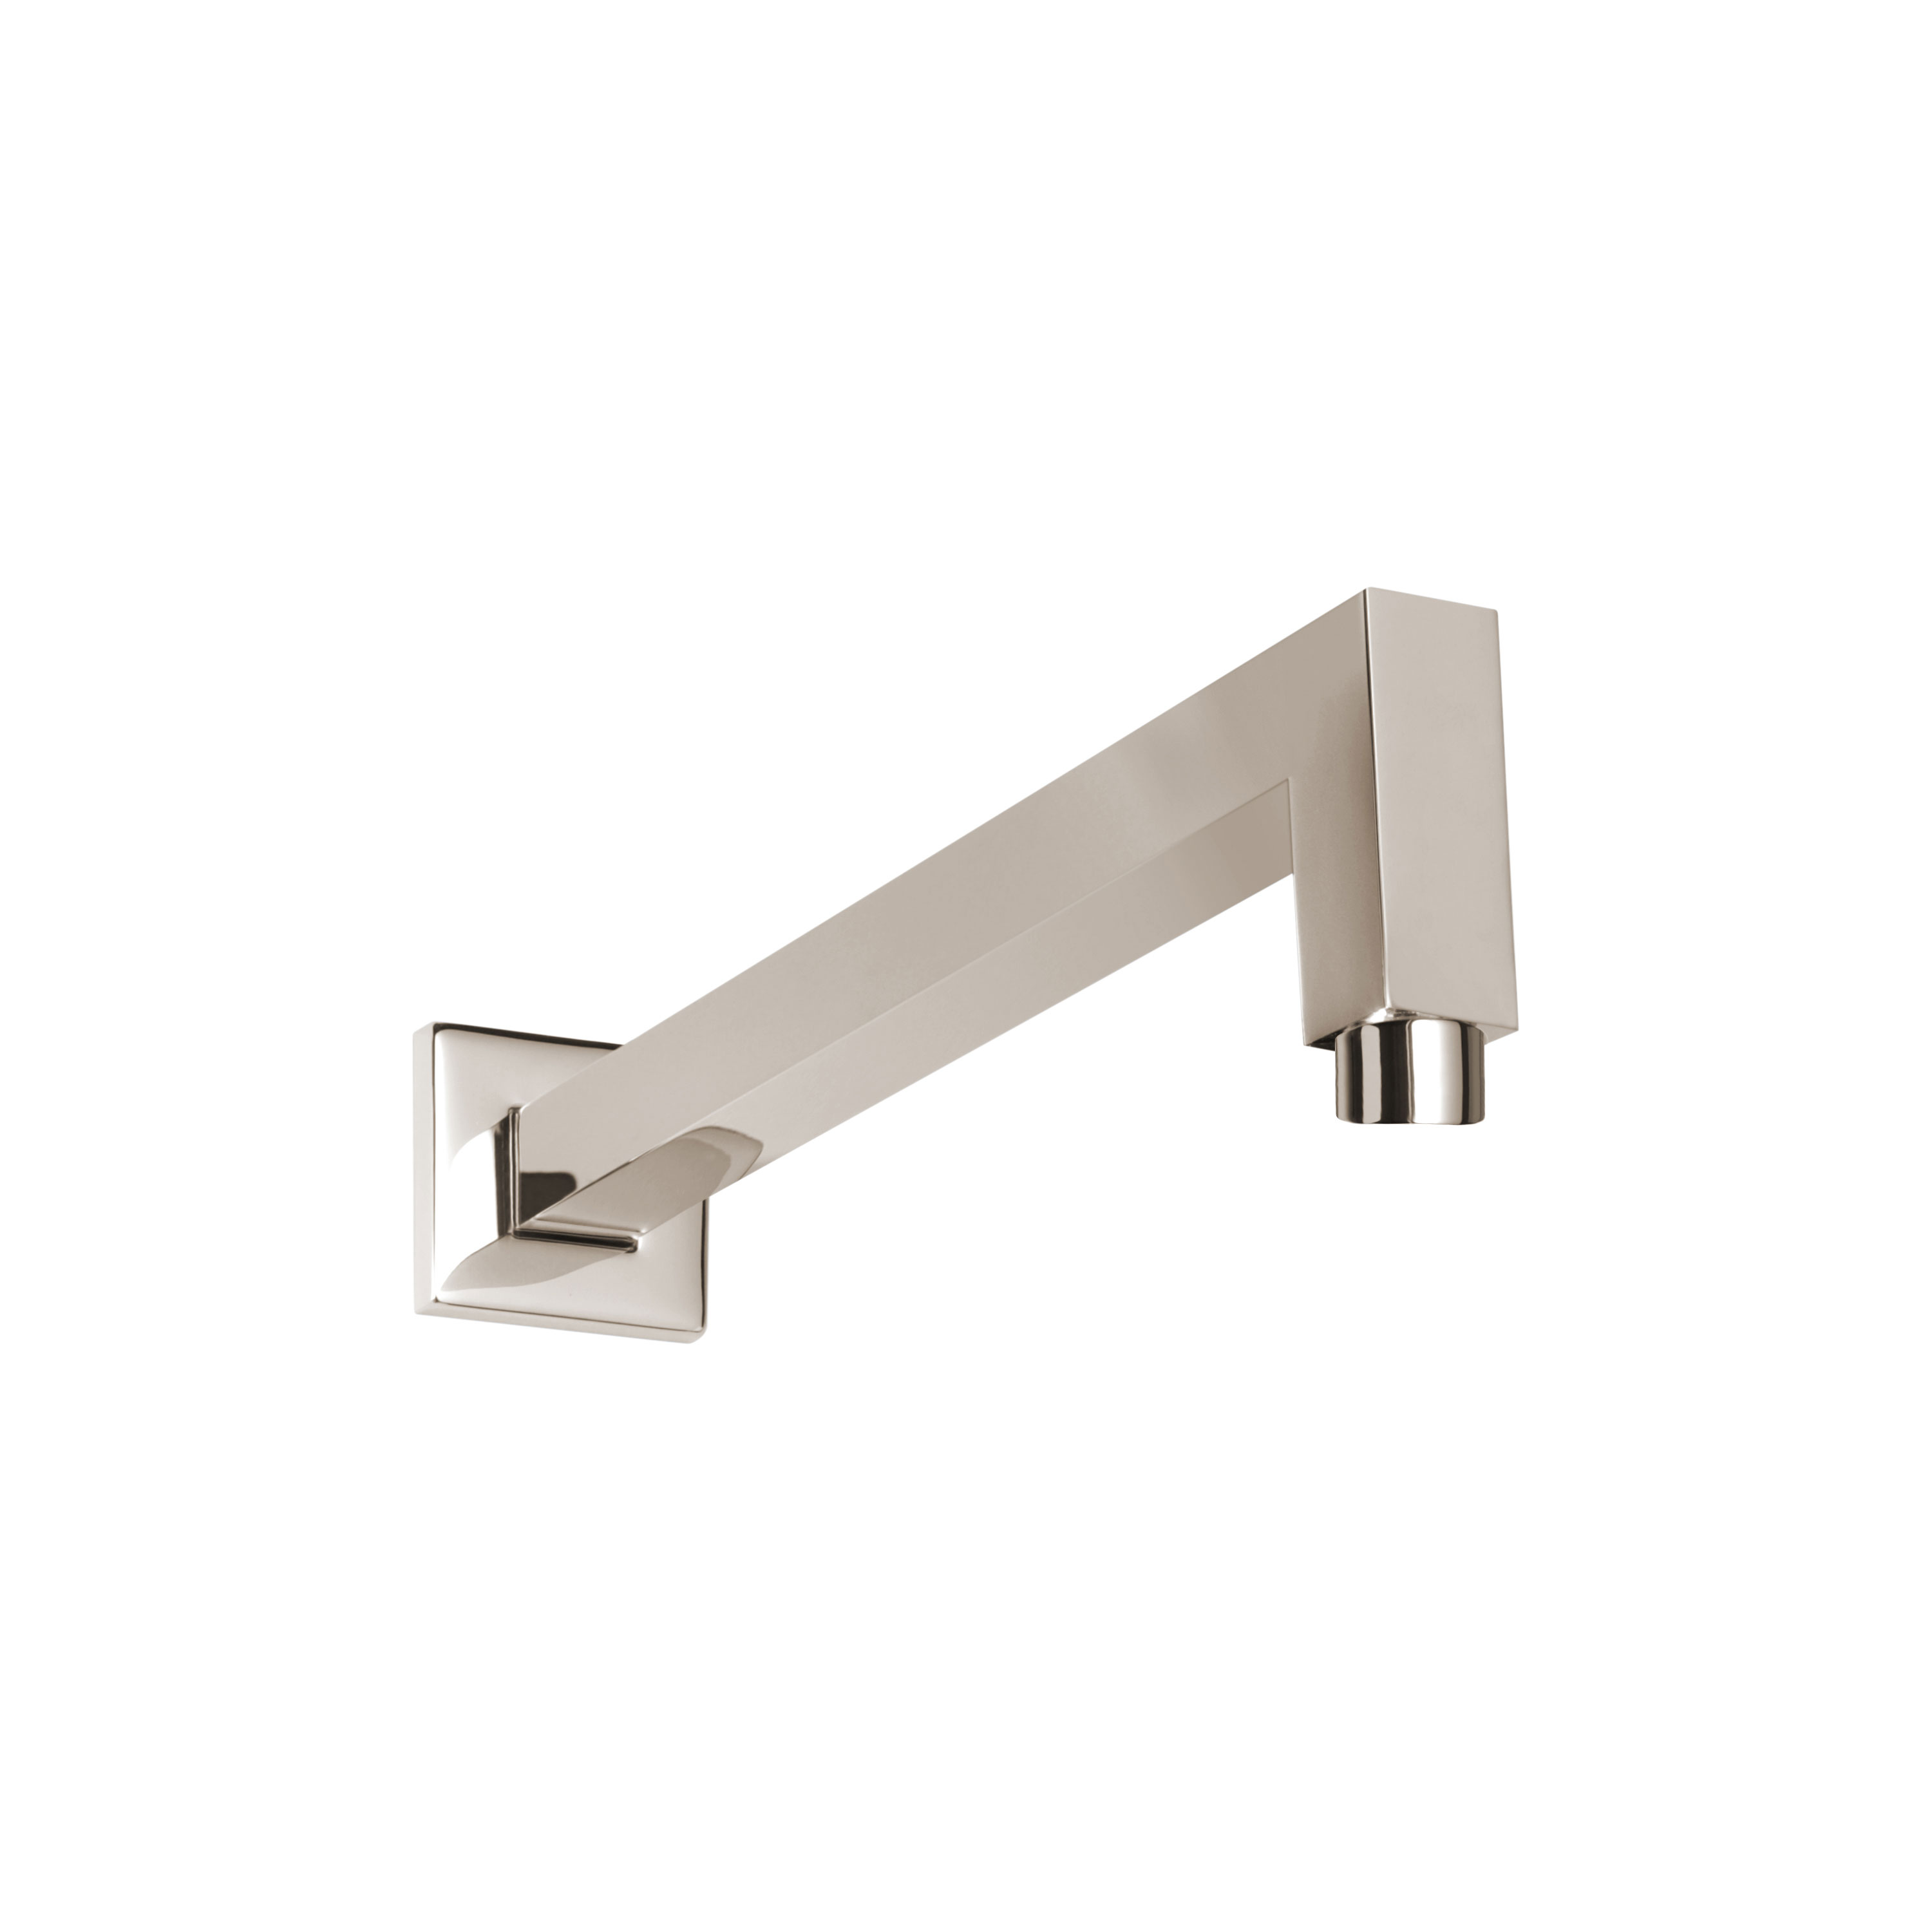 Thermasol 15-1004-PN 16" - 90 Degree Wall Shower Arm Square - Polished Nickel